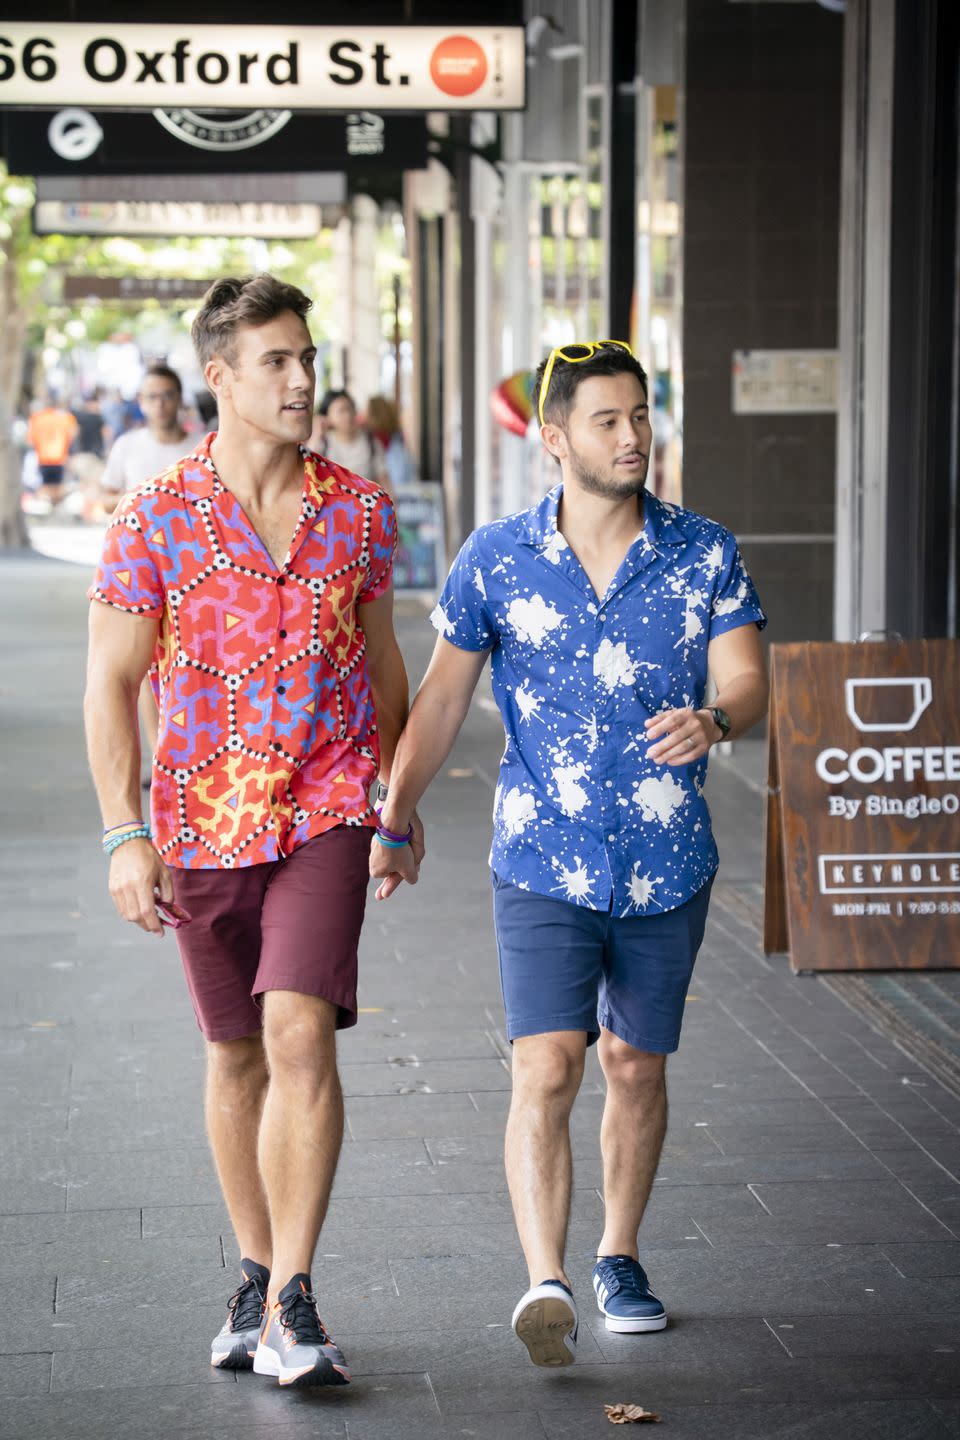 Friday, February 28: Aaron and David are in Sydney